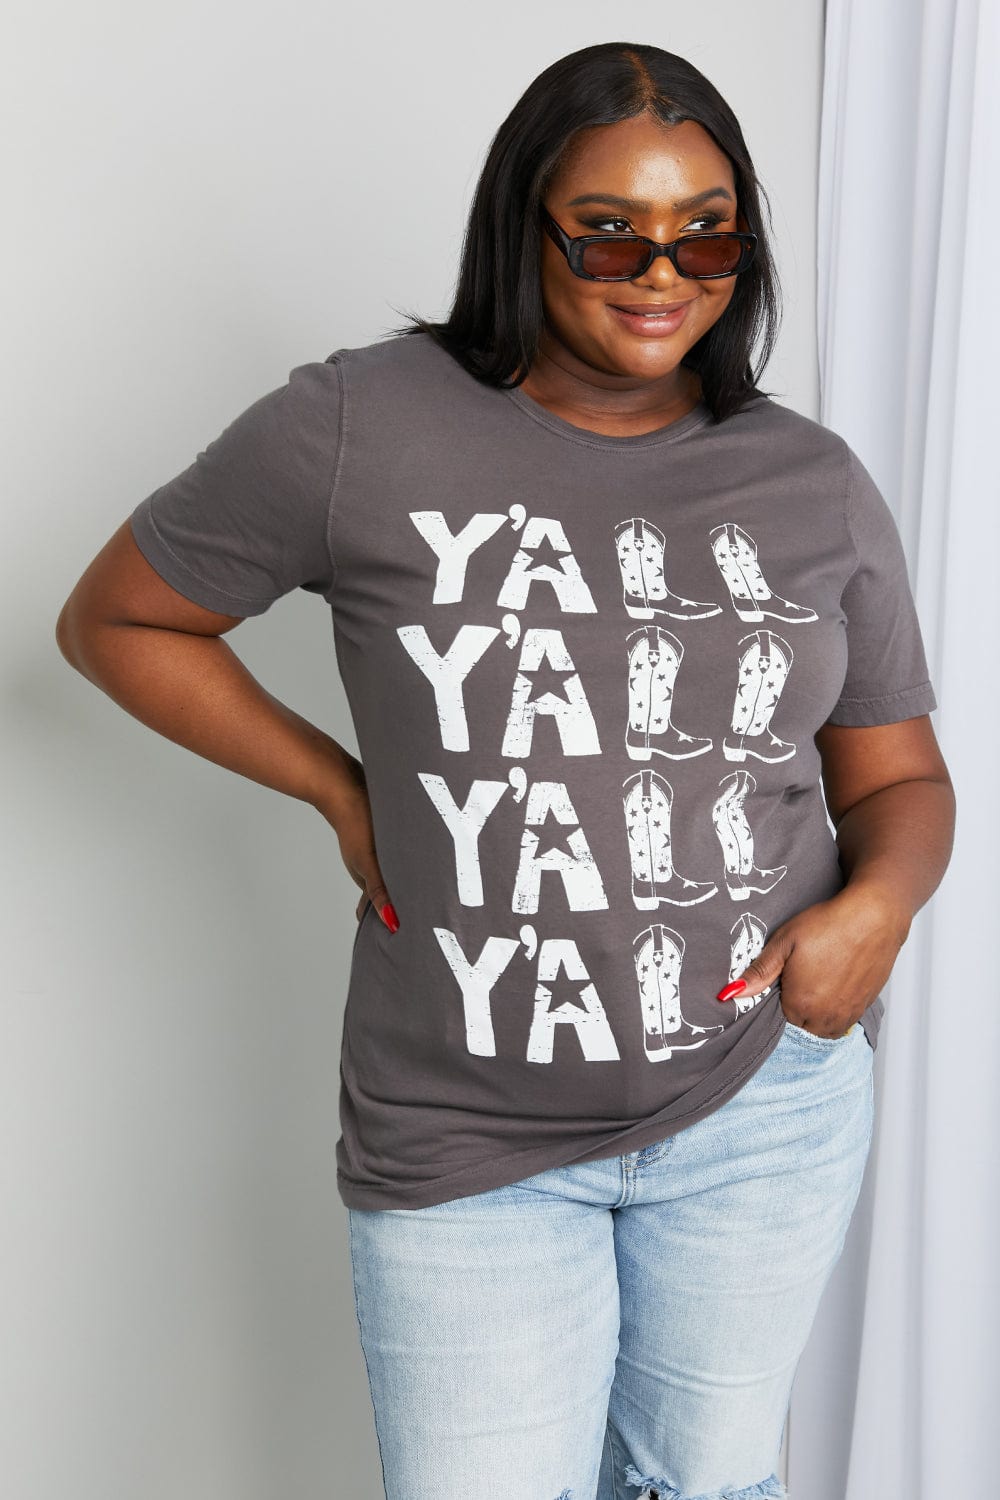 Full Size Y'ALL Cowboy Boots Graphic Tee - Body By J'ne